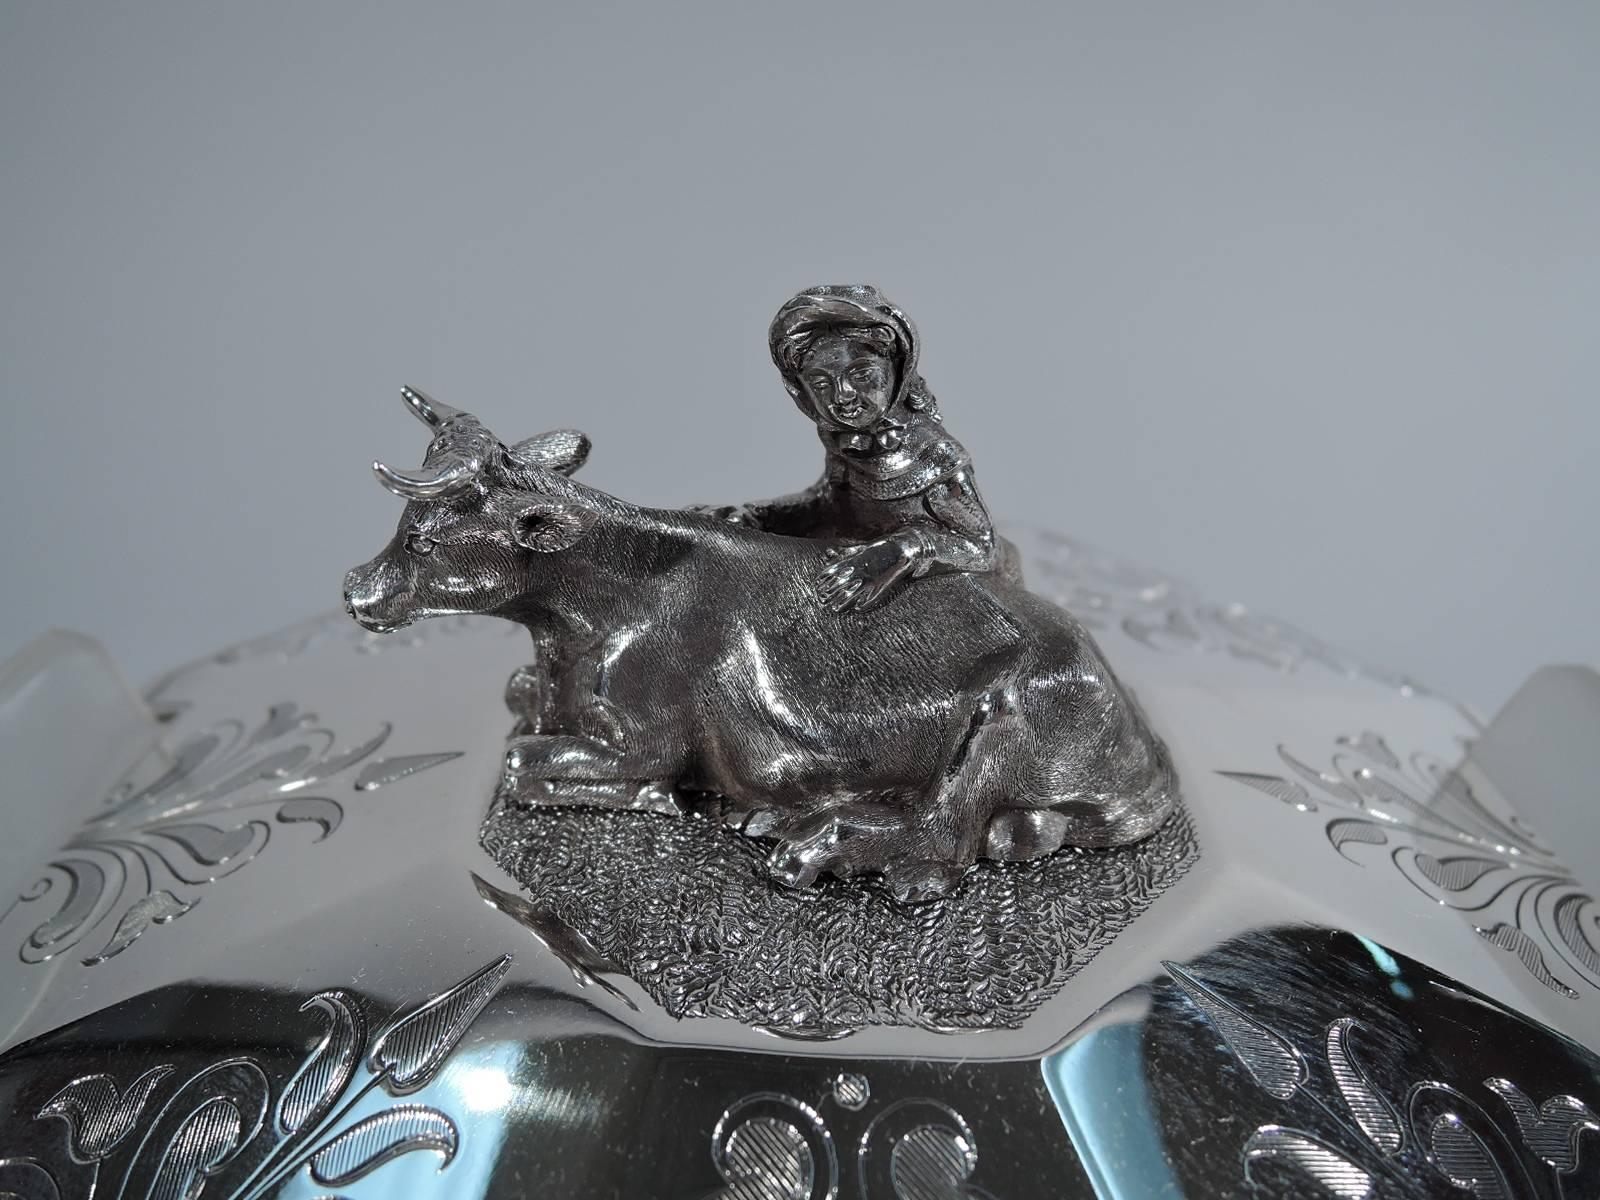 Victorian sterling silver and frosted covered glass butter dish on plate. Made by George Angell in London in 1849. Bowl frosted glass with tapering faceted sides and top bracket handles. Cover tapering and faceted with engraved scrollwork and 1